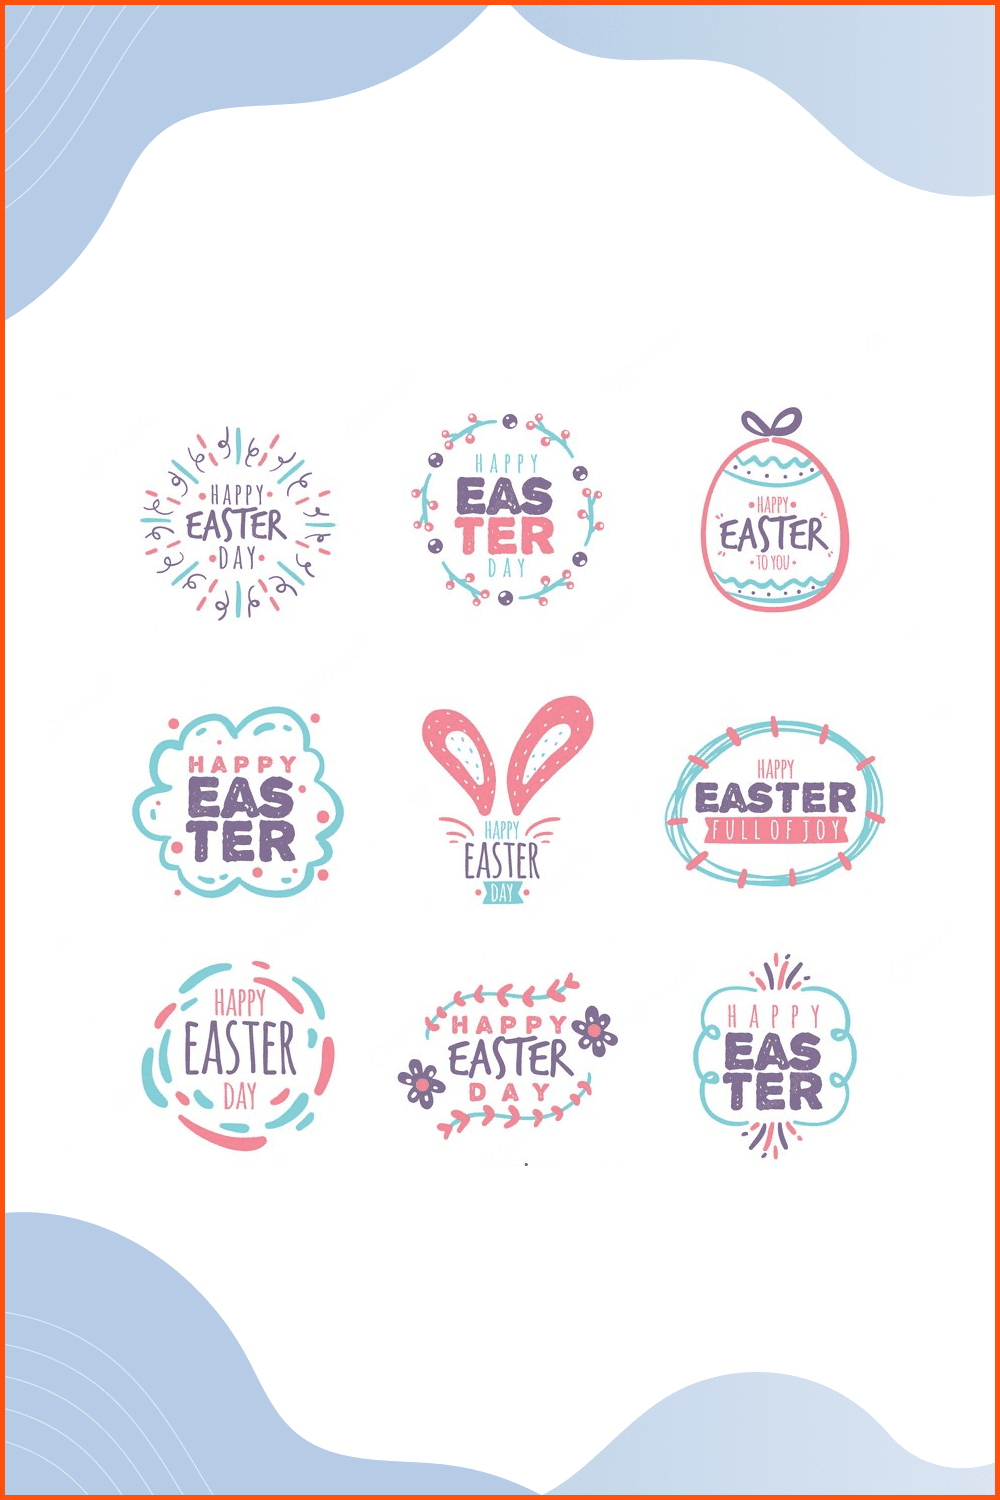 Easter day badge collection.